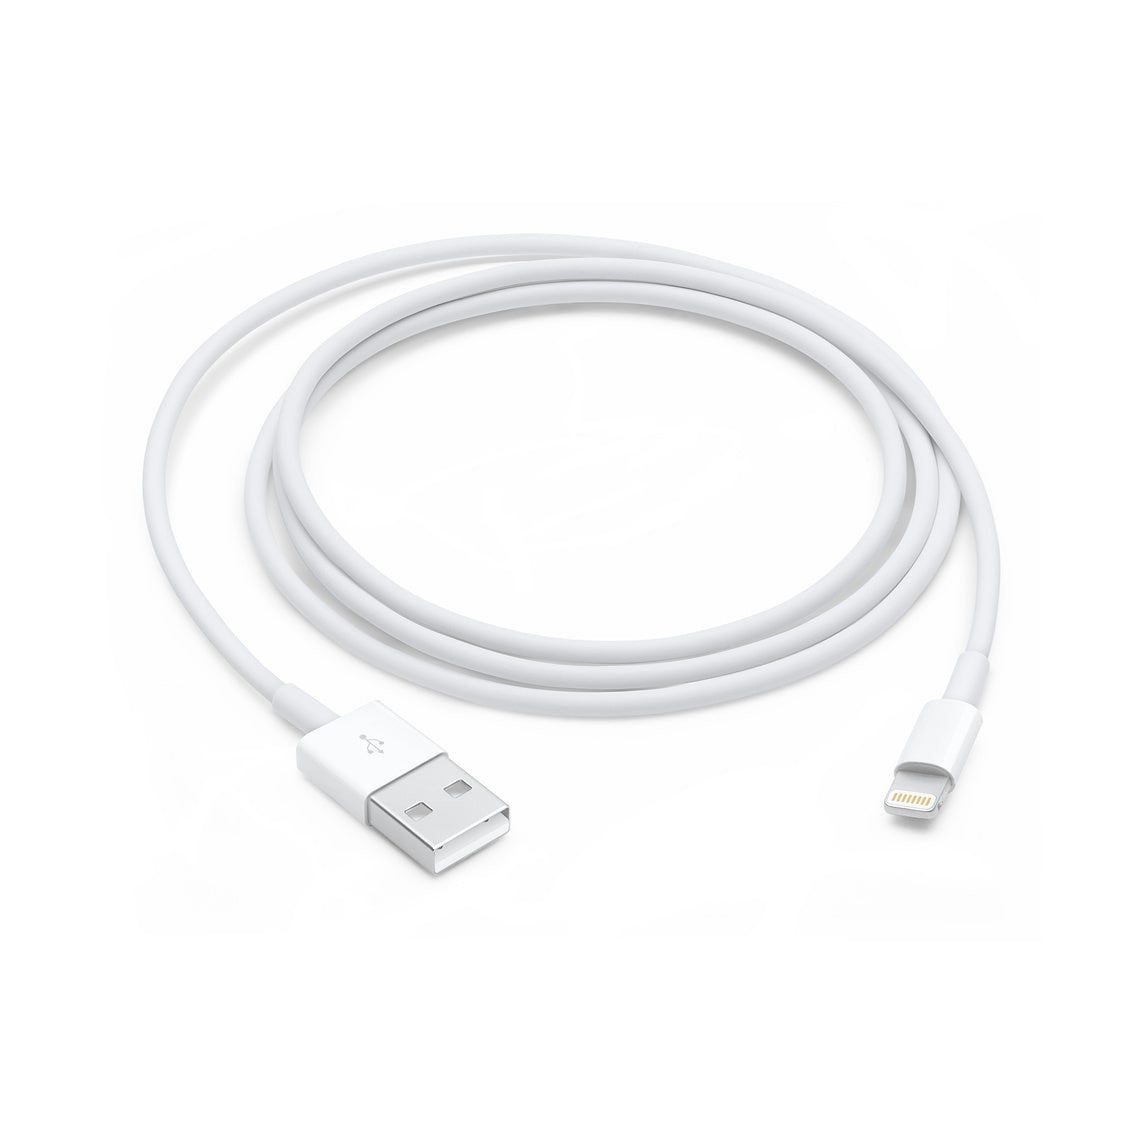 Apple Original iPhone 3.5mm Earphone + Lightning Cable (1M) - Combo Pack 2